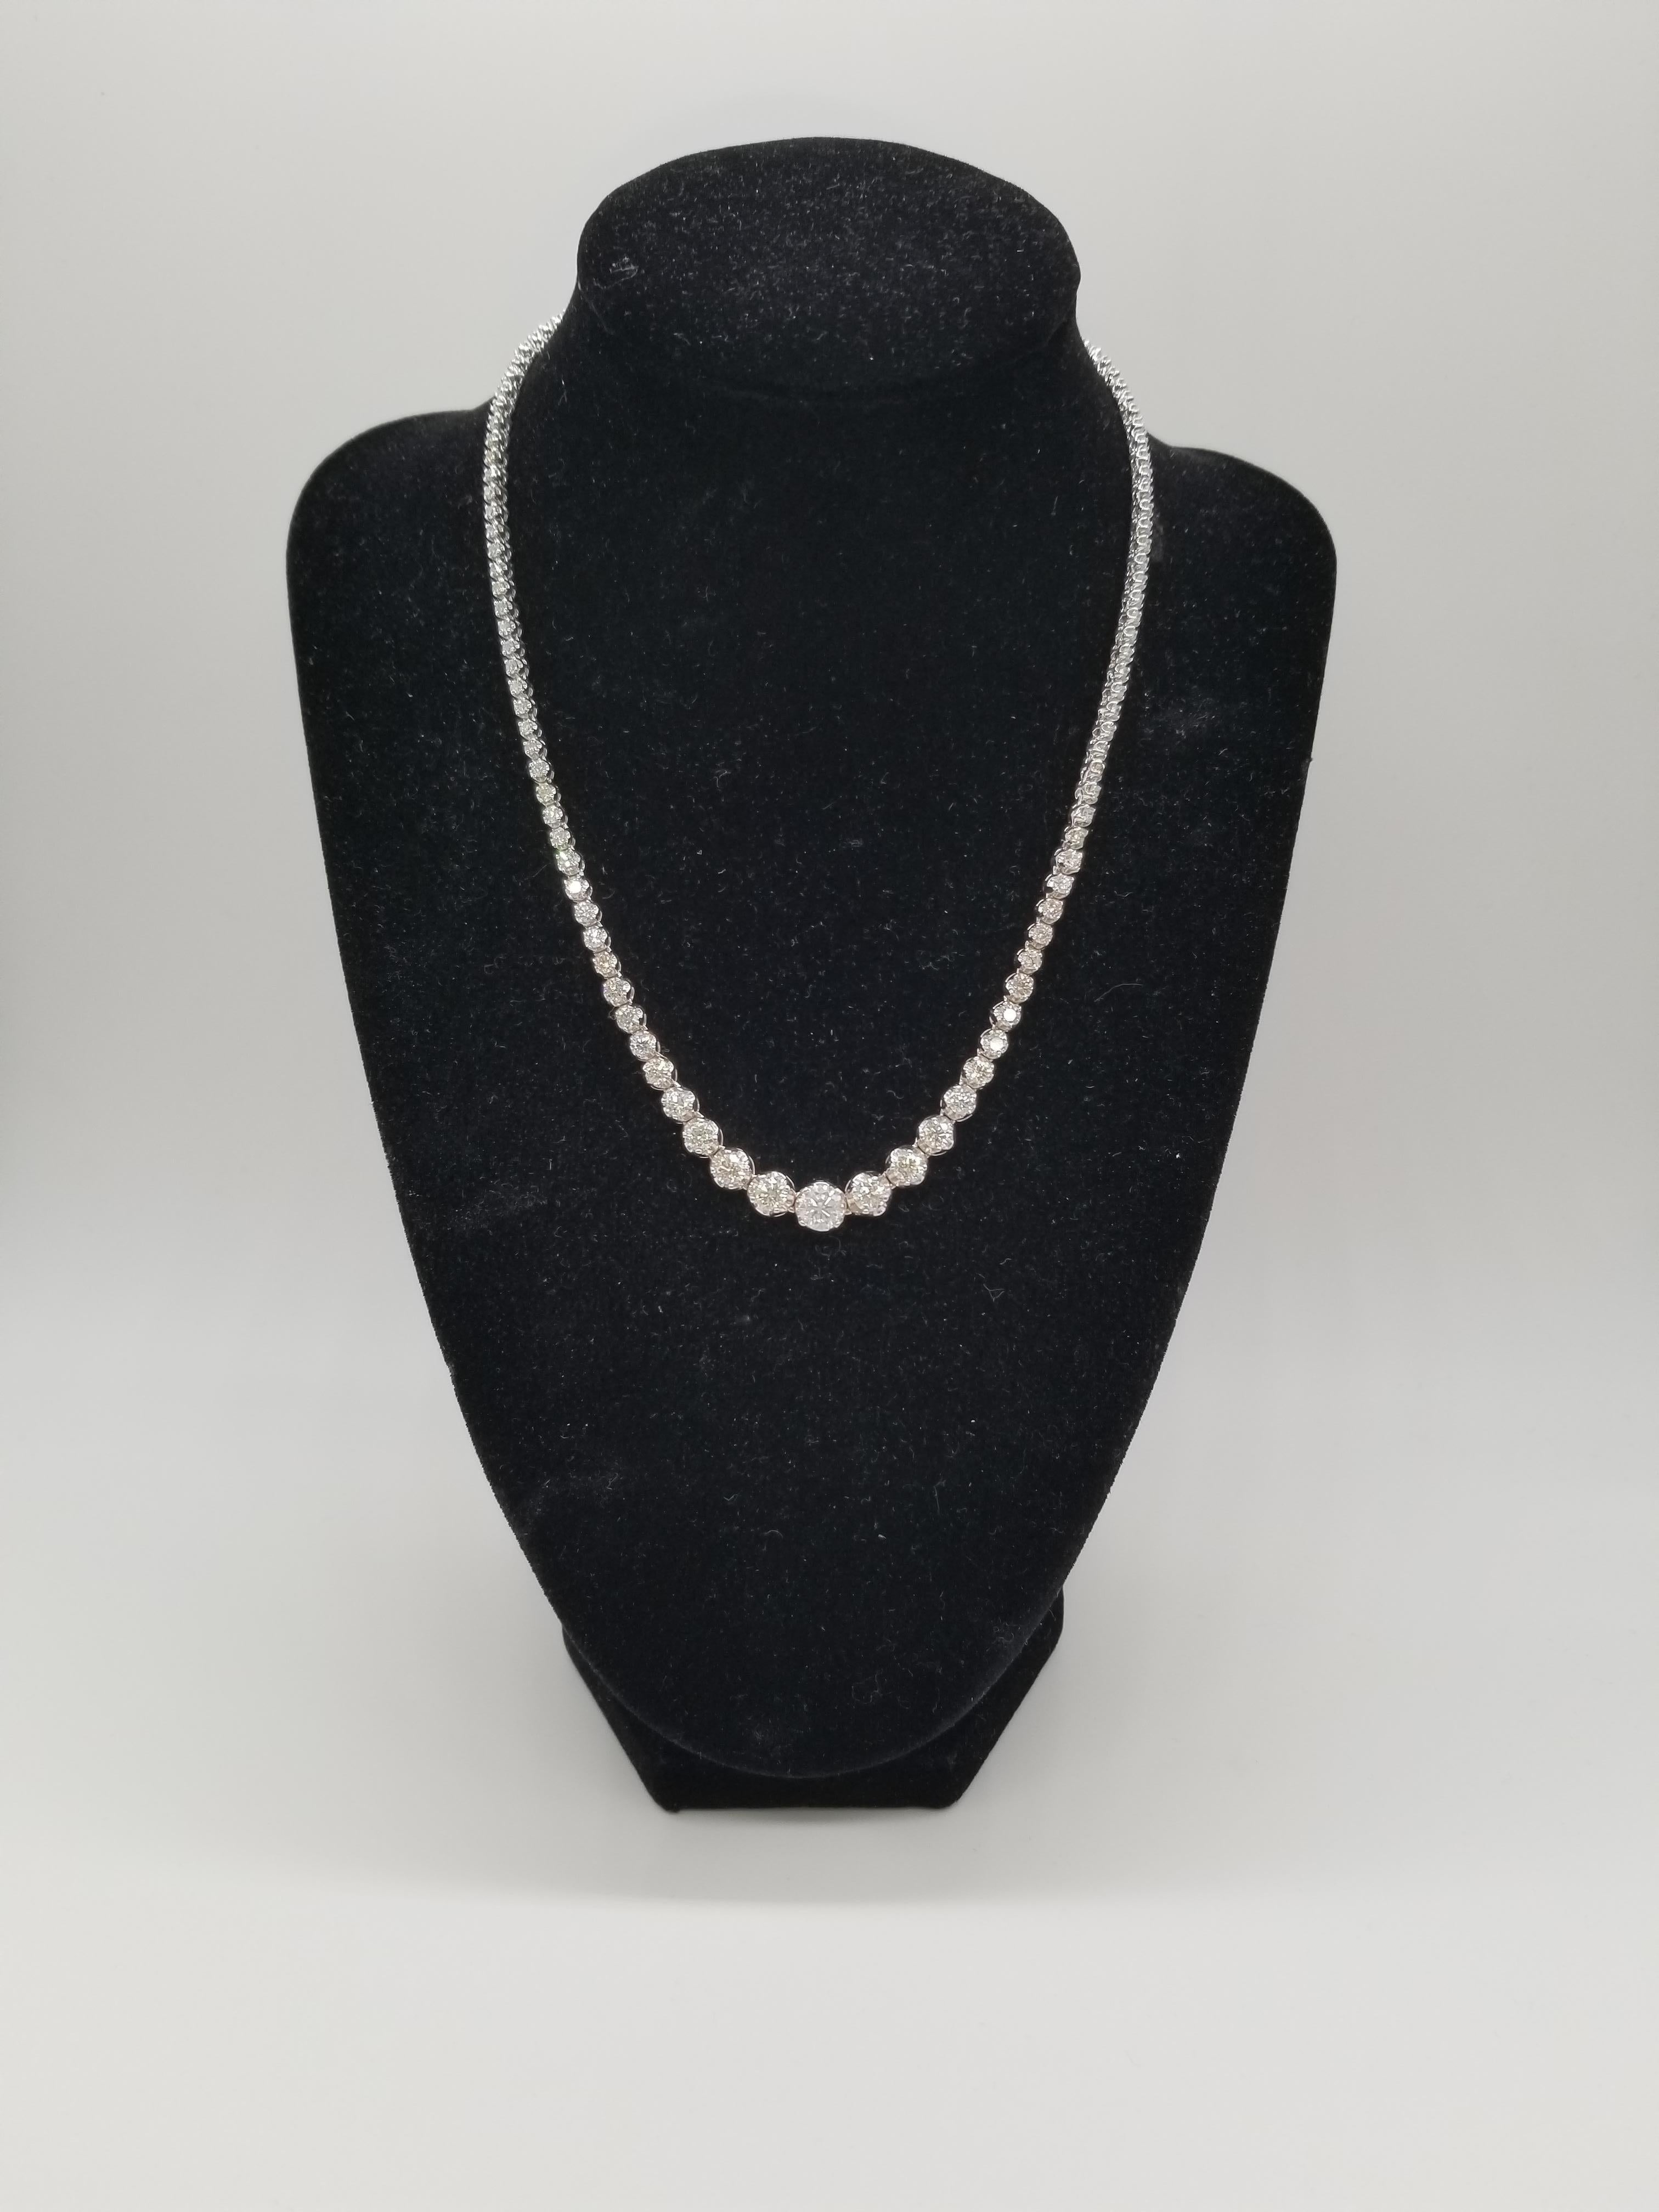 Brilliant and beautiful graduated Riviera necklace, natural round-brilliant cut white diamonds clean and Excellent shine. 14k white gold classic four-prong style for maximum light brilliance. Approx. 8.40 cttw, 16 inch length. Average color I Color,